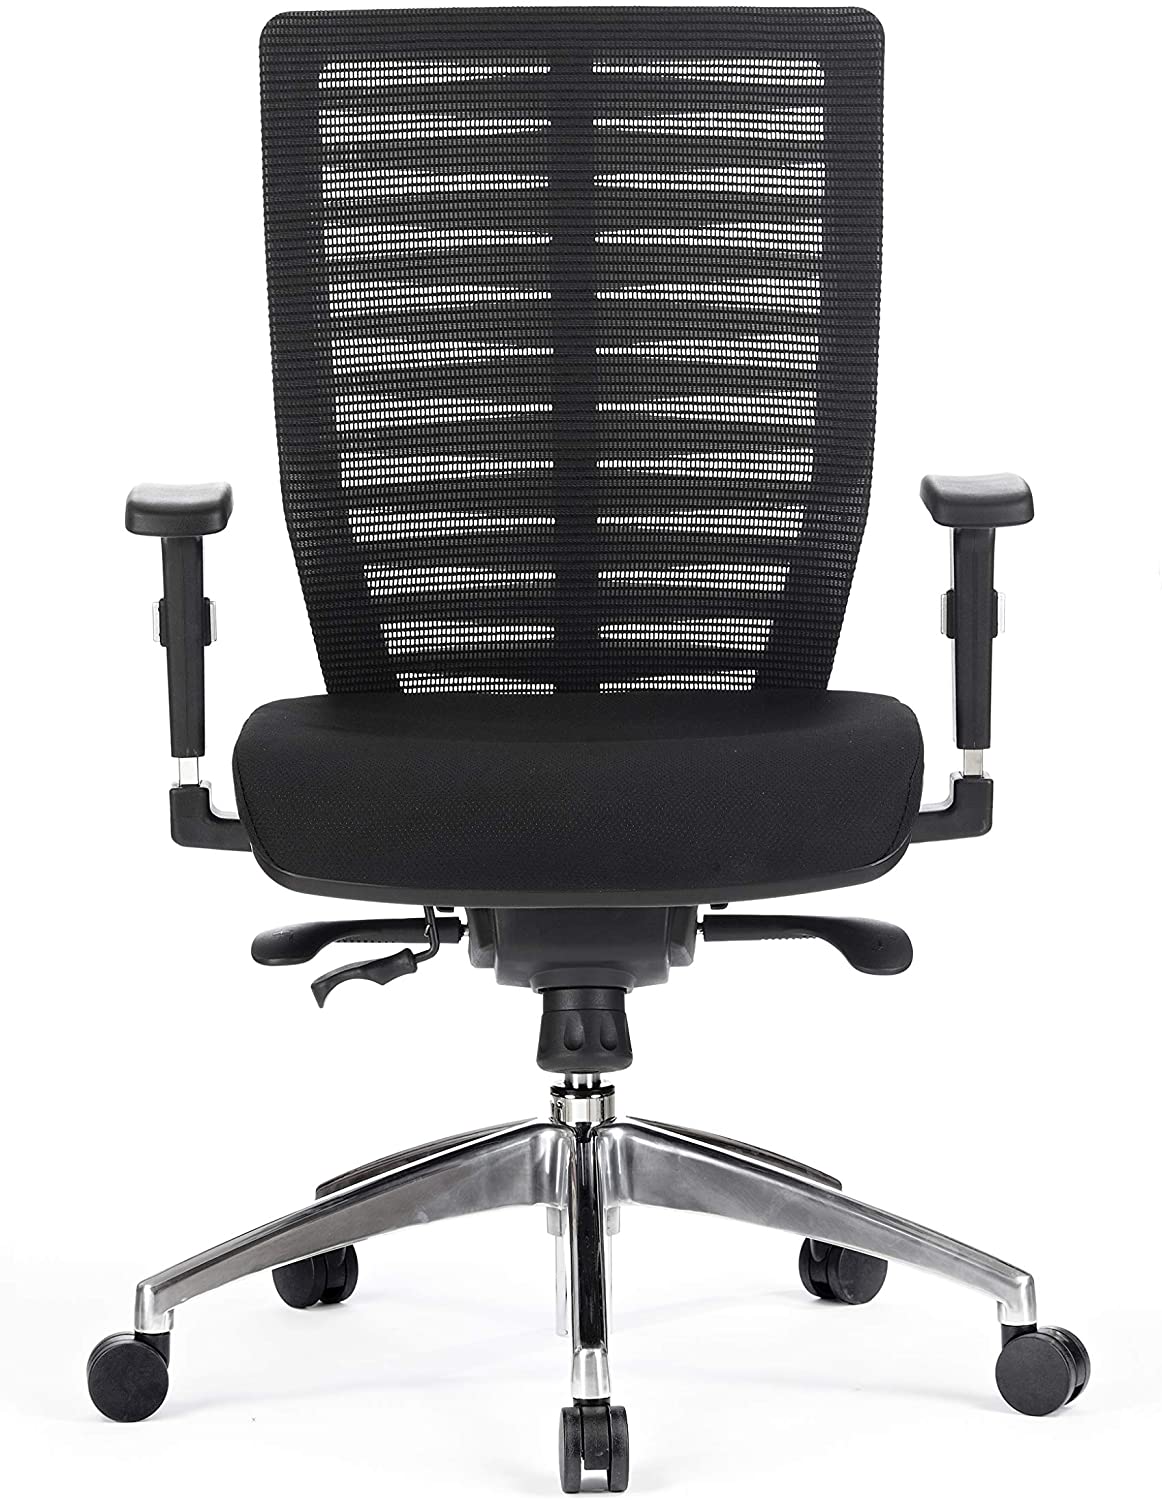 ZEBRA EXECUTIVE MESH BACK CHAIR - INCLUDES BOXED SHIPPING IN SYD METRO